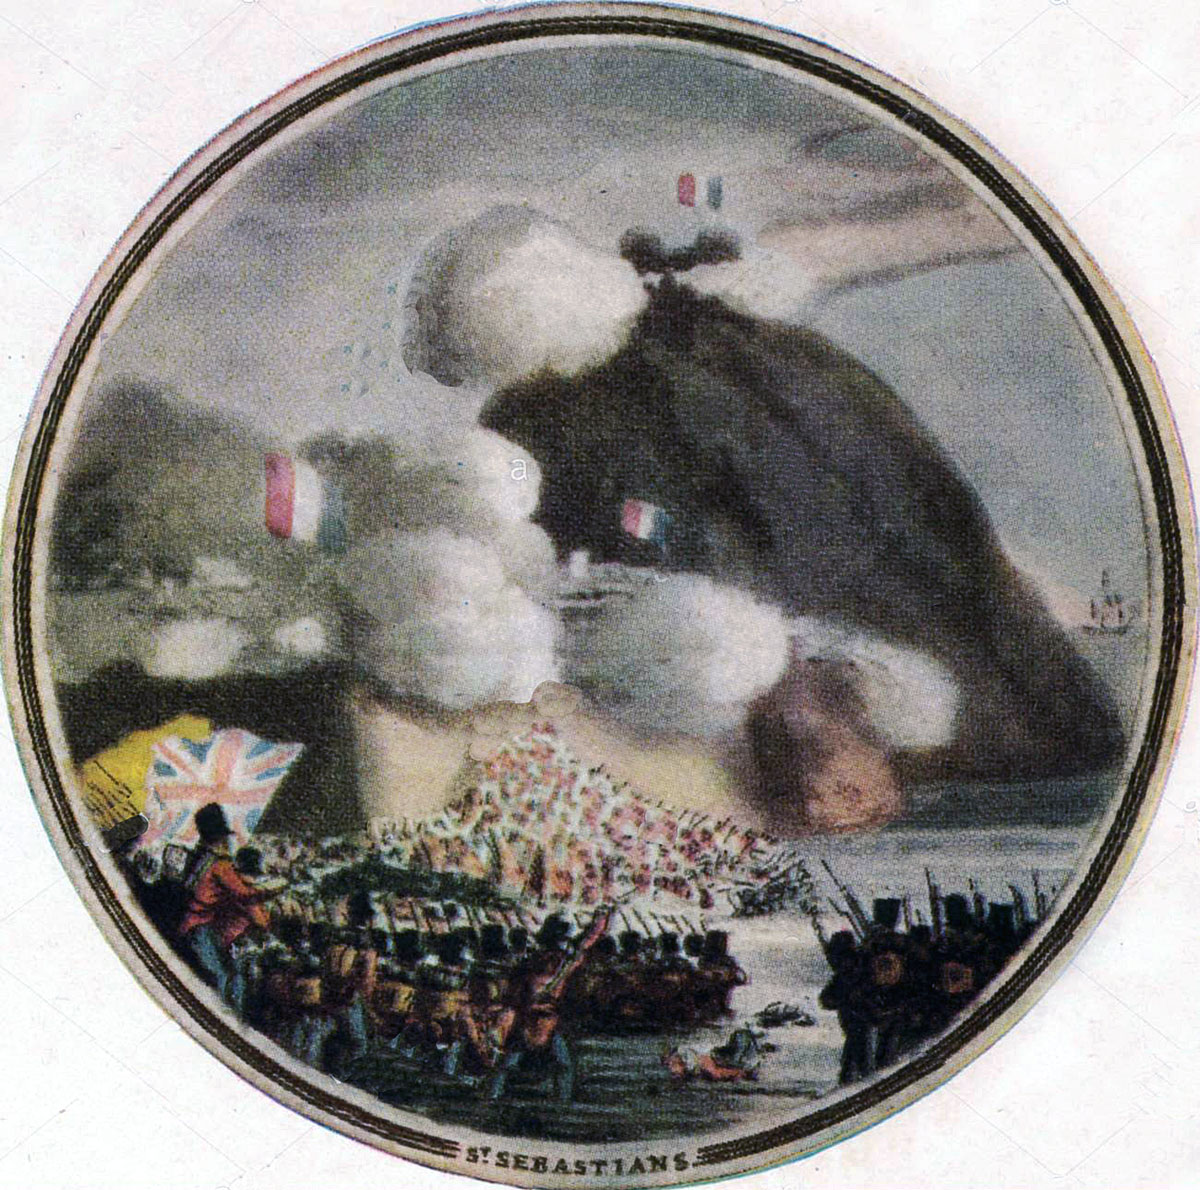 Medal commemorating the Storming of San Sebastian between 11th July and 9th September 1813 in the Peninsular War: picture by Edward Orme